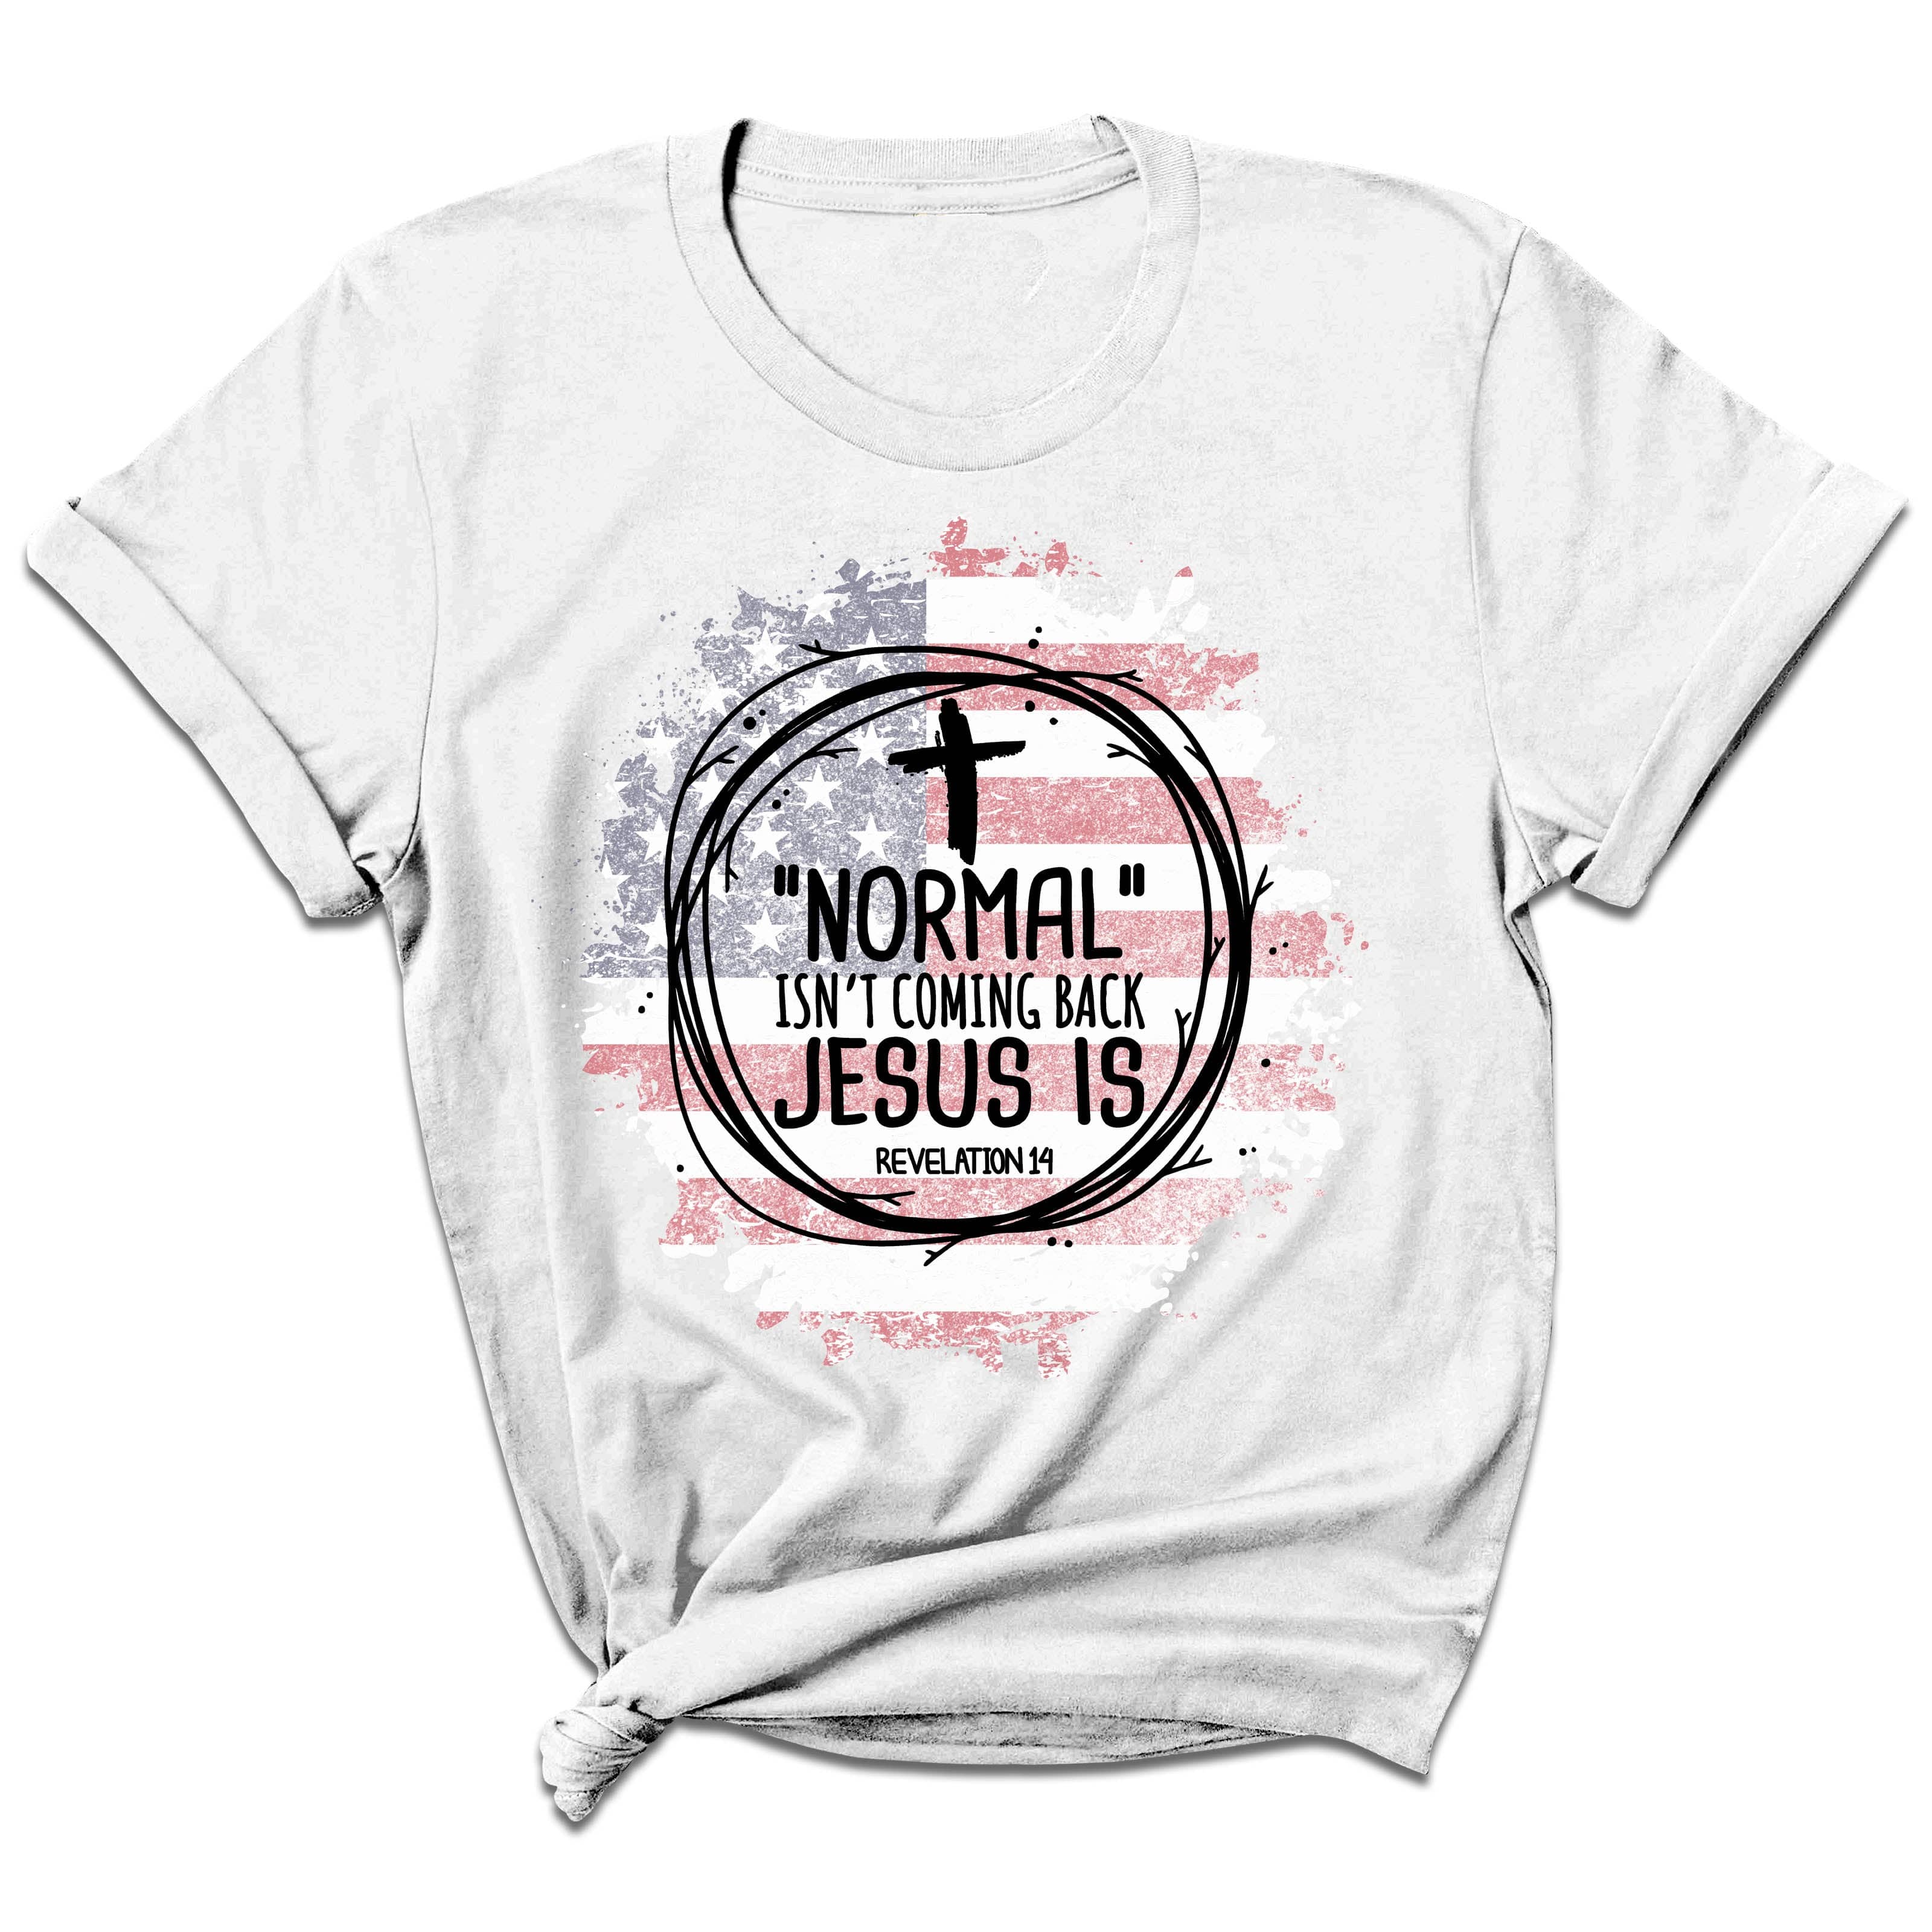 Normal Isn't Coming Back Jesus Is Women's Graphic Print T-Shirt